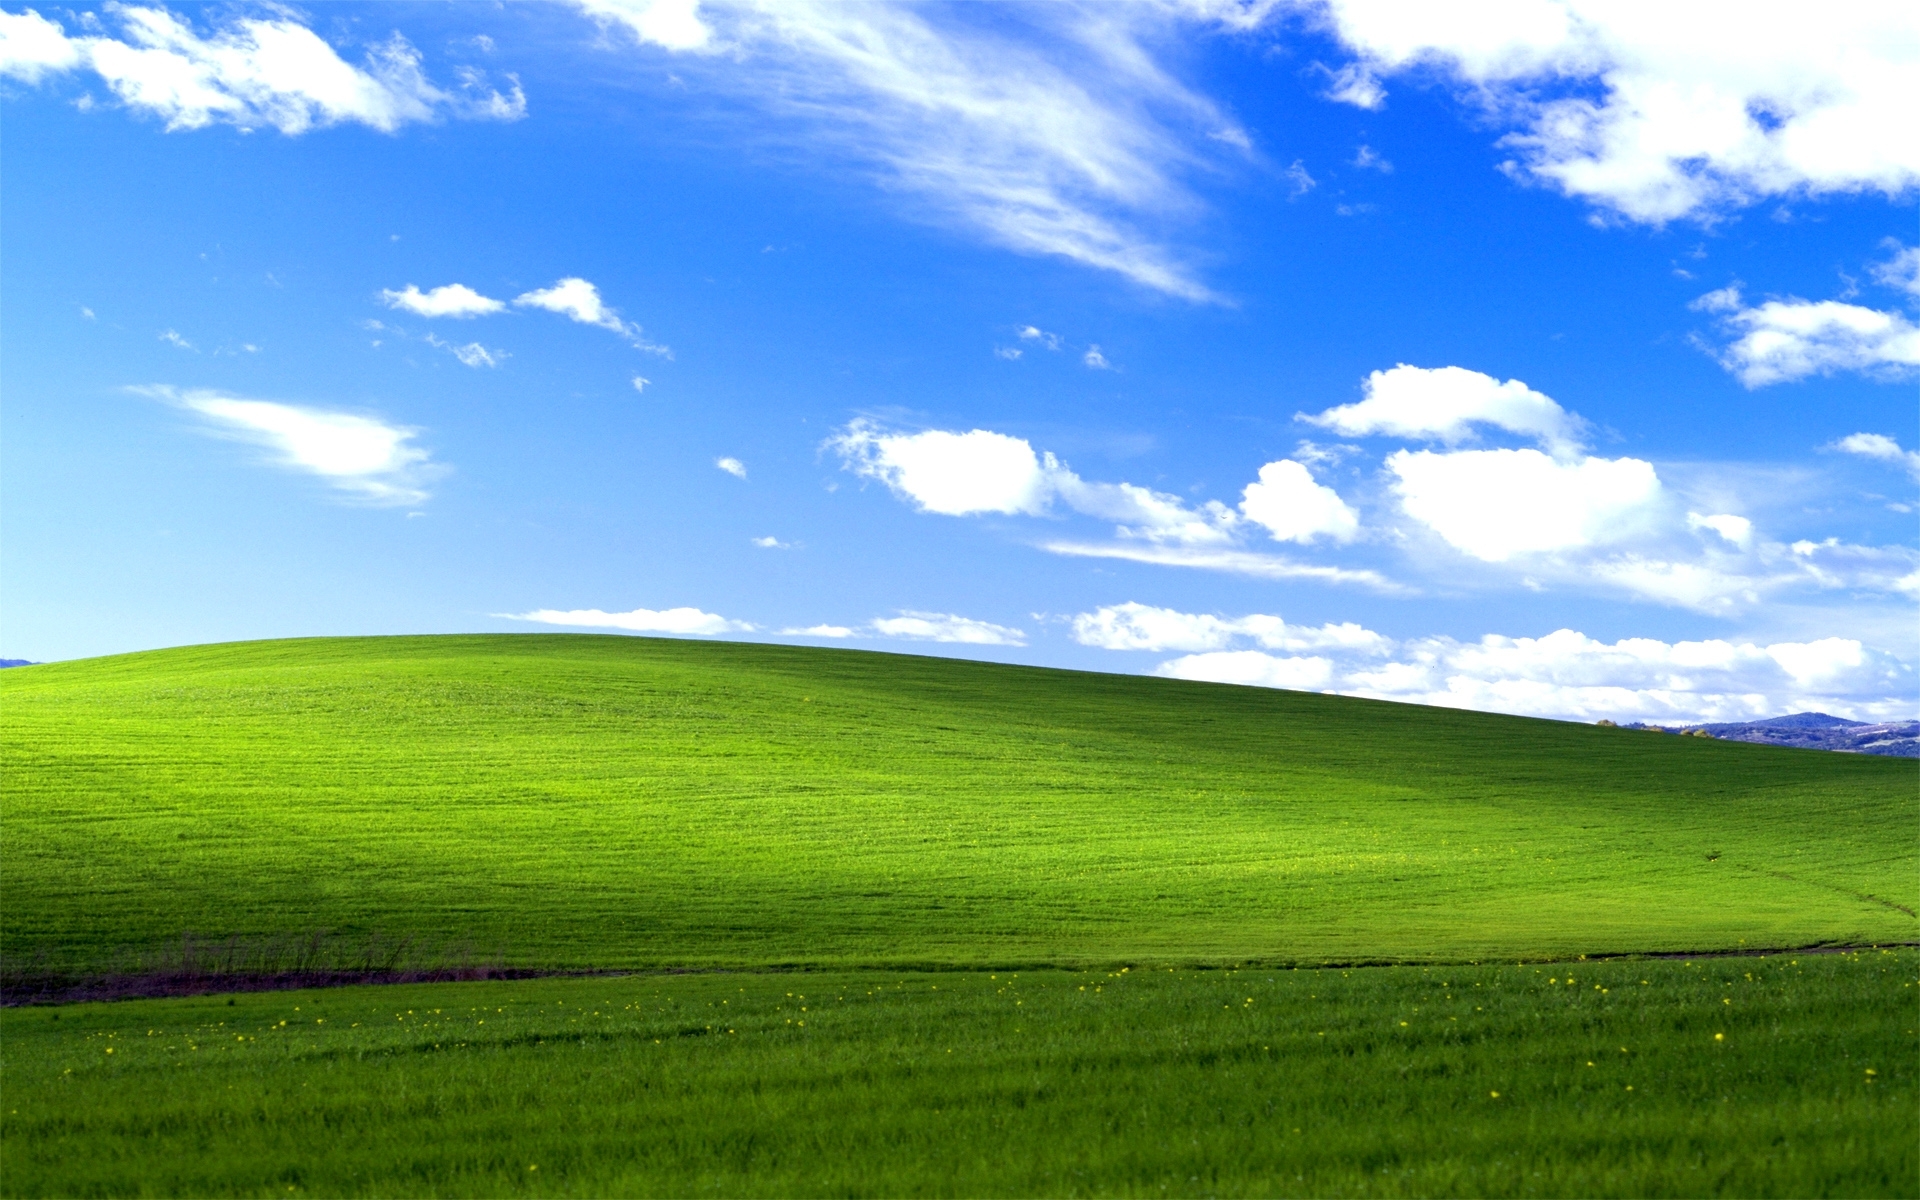 10 New Windows Xp Wallpapers Hd FULL HD 1920×1080 For PC Background